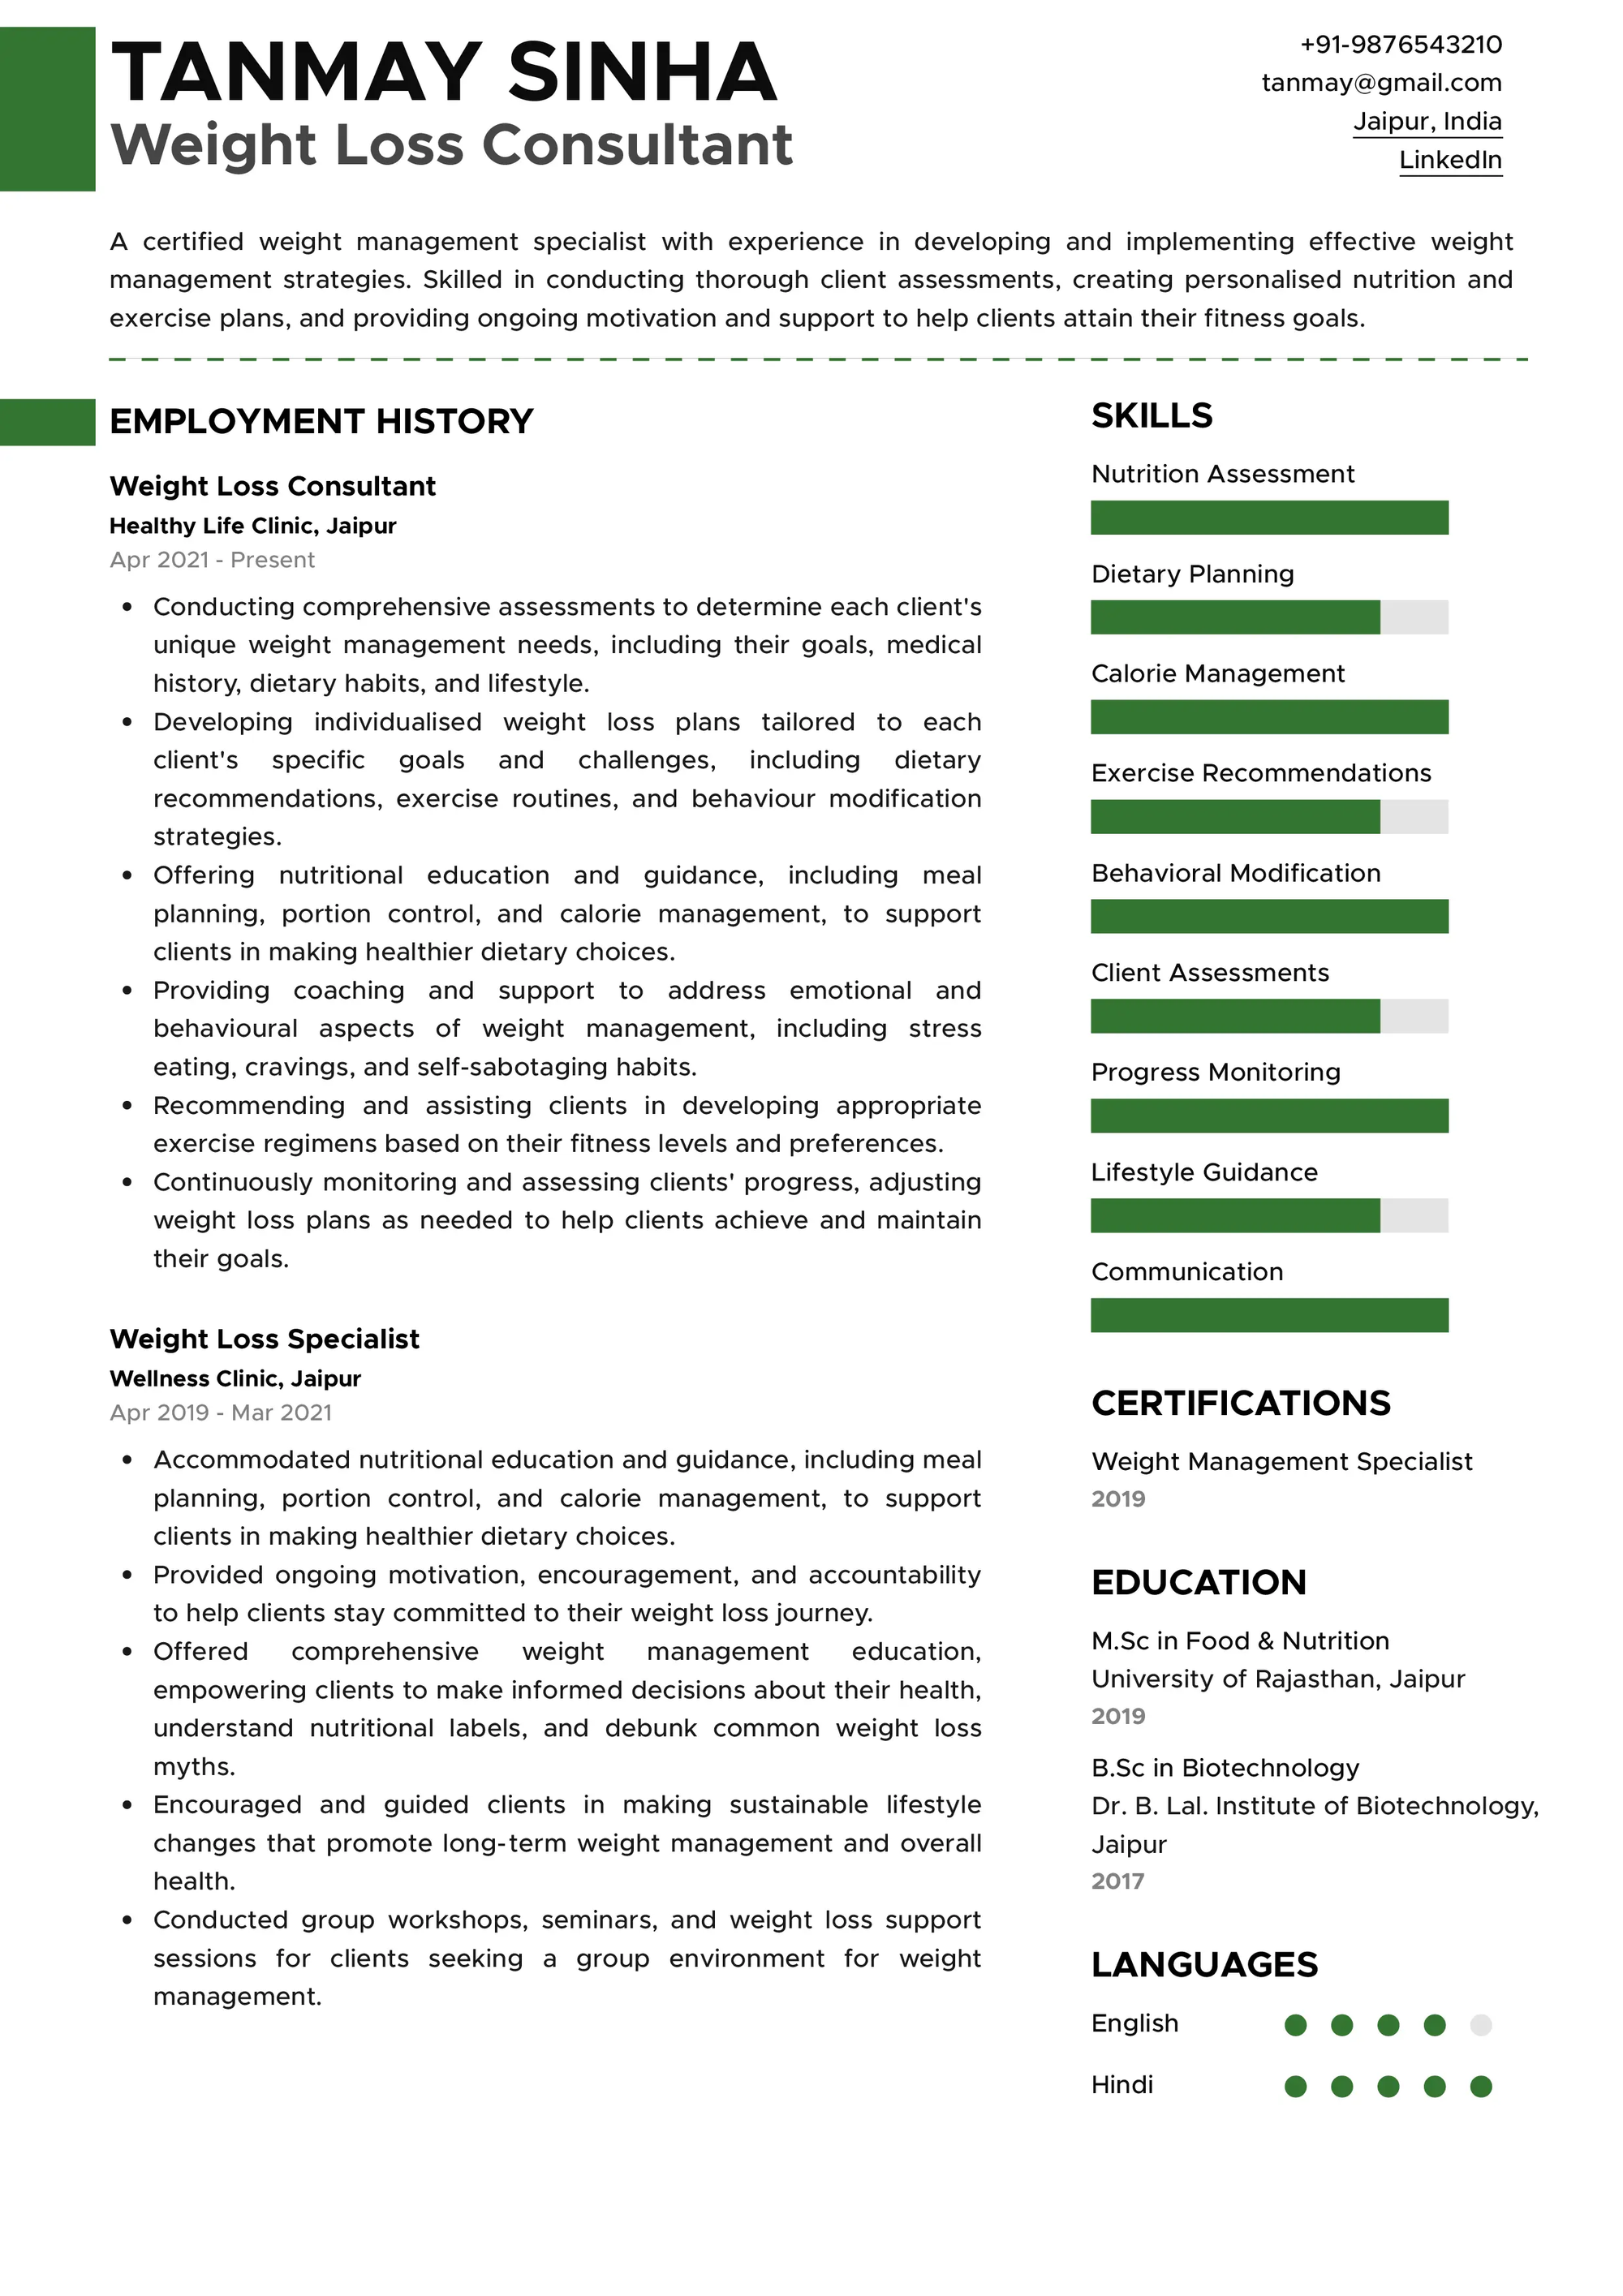 Resume of Weight Loss Consultant built on Resumod